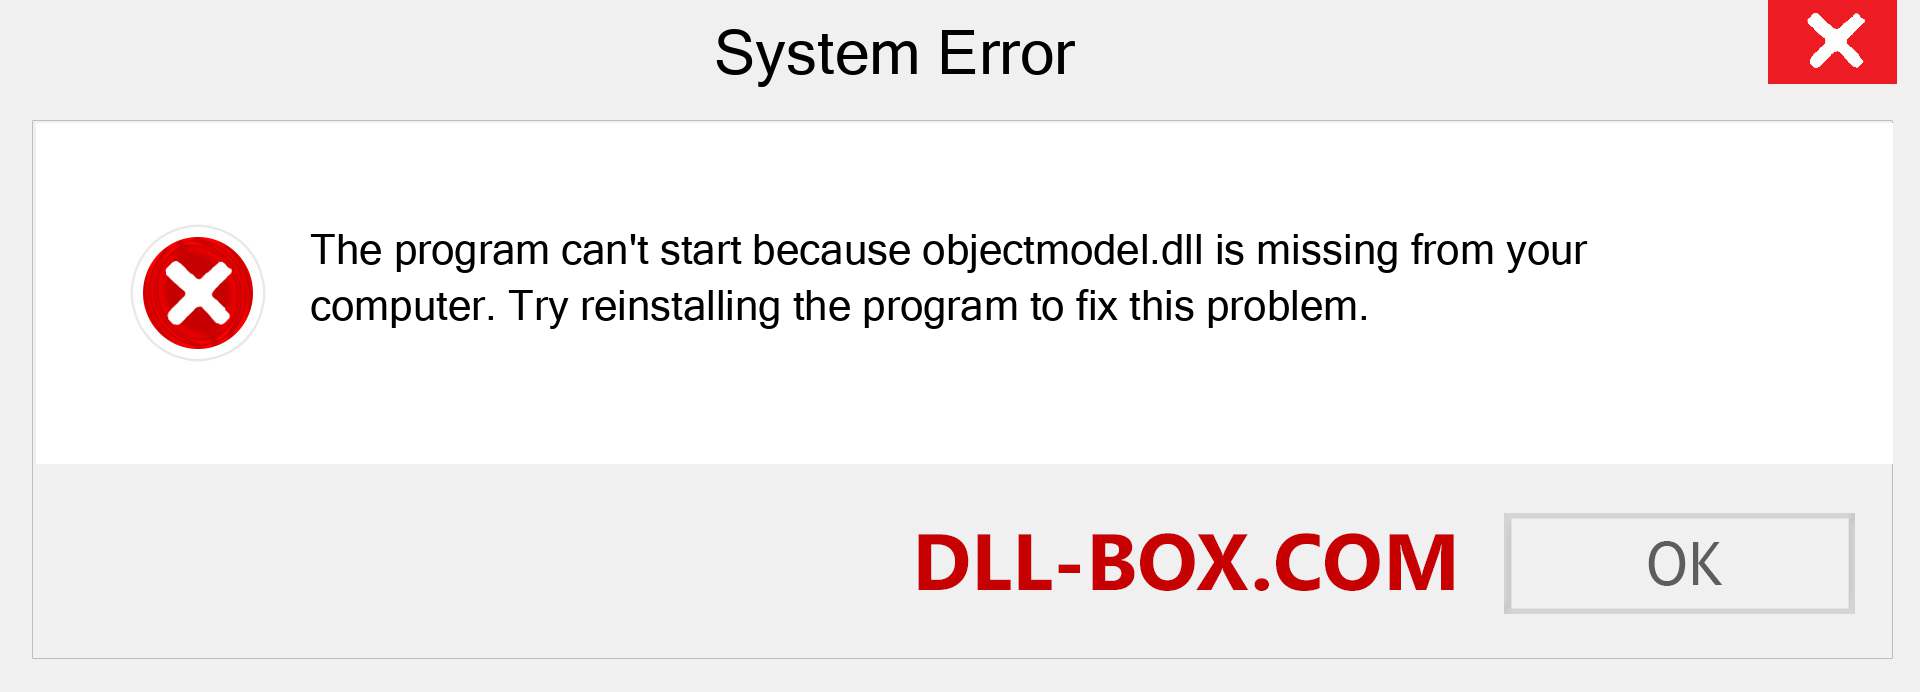  objectmodel.dll file is missing?. Download for Windows 7, 8, 10 - Fix  objectmodel dll Missing Error on Windows, photos, images